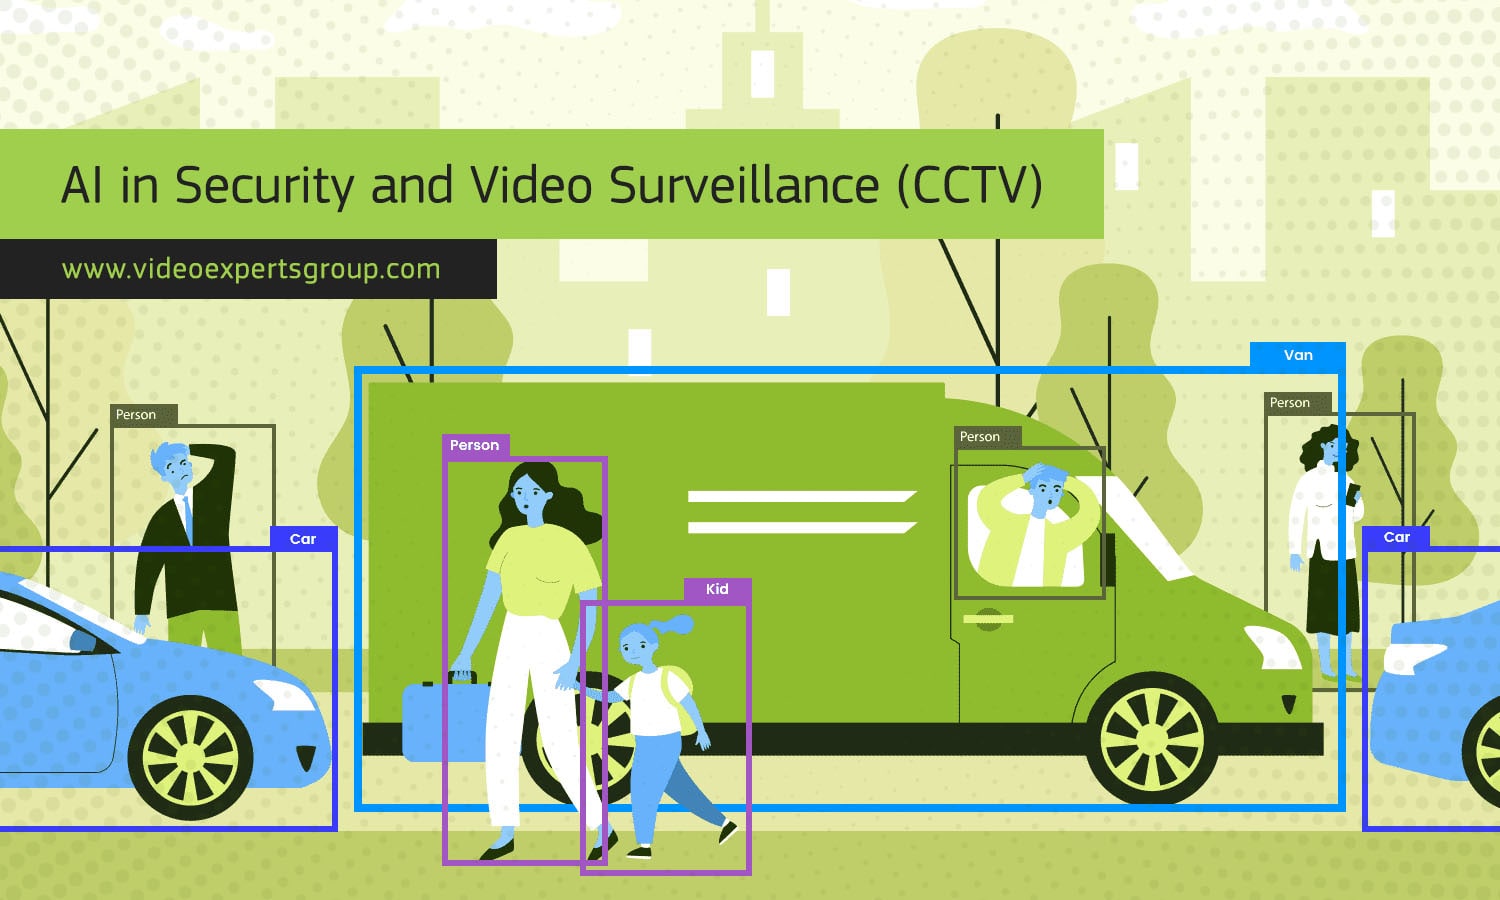 AI in Security and Video Surveillance (CCTV)